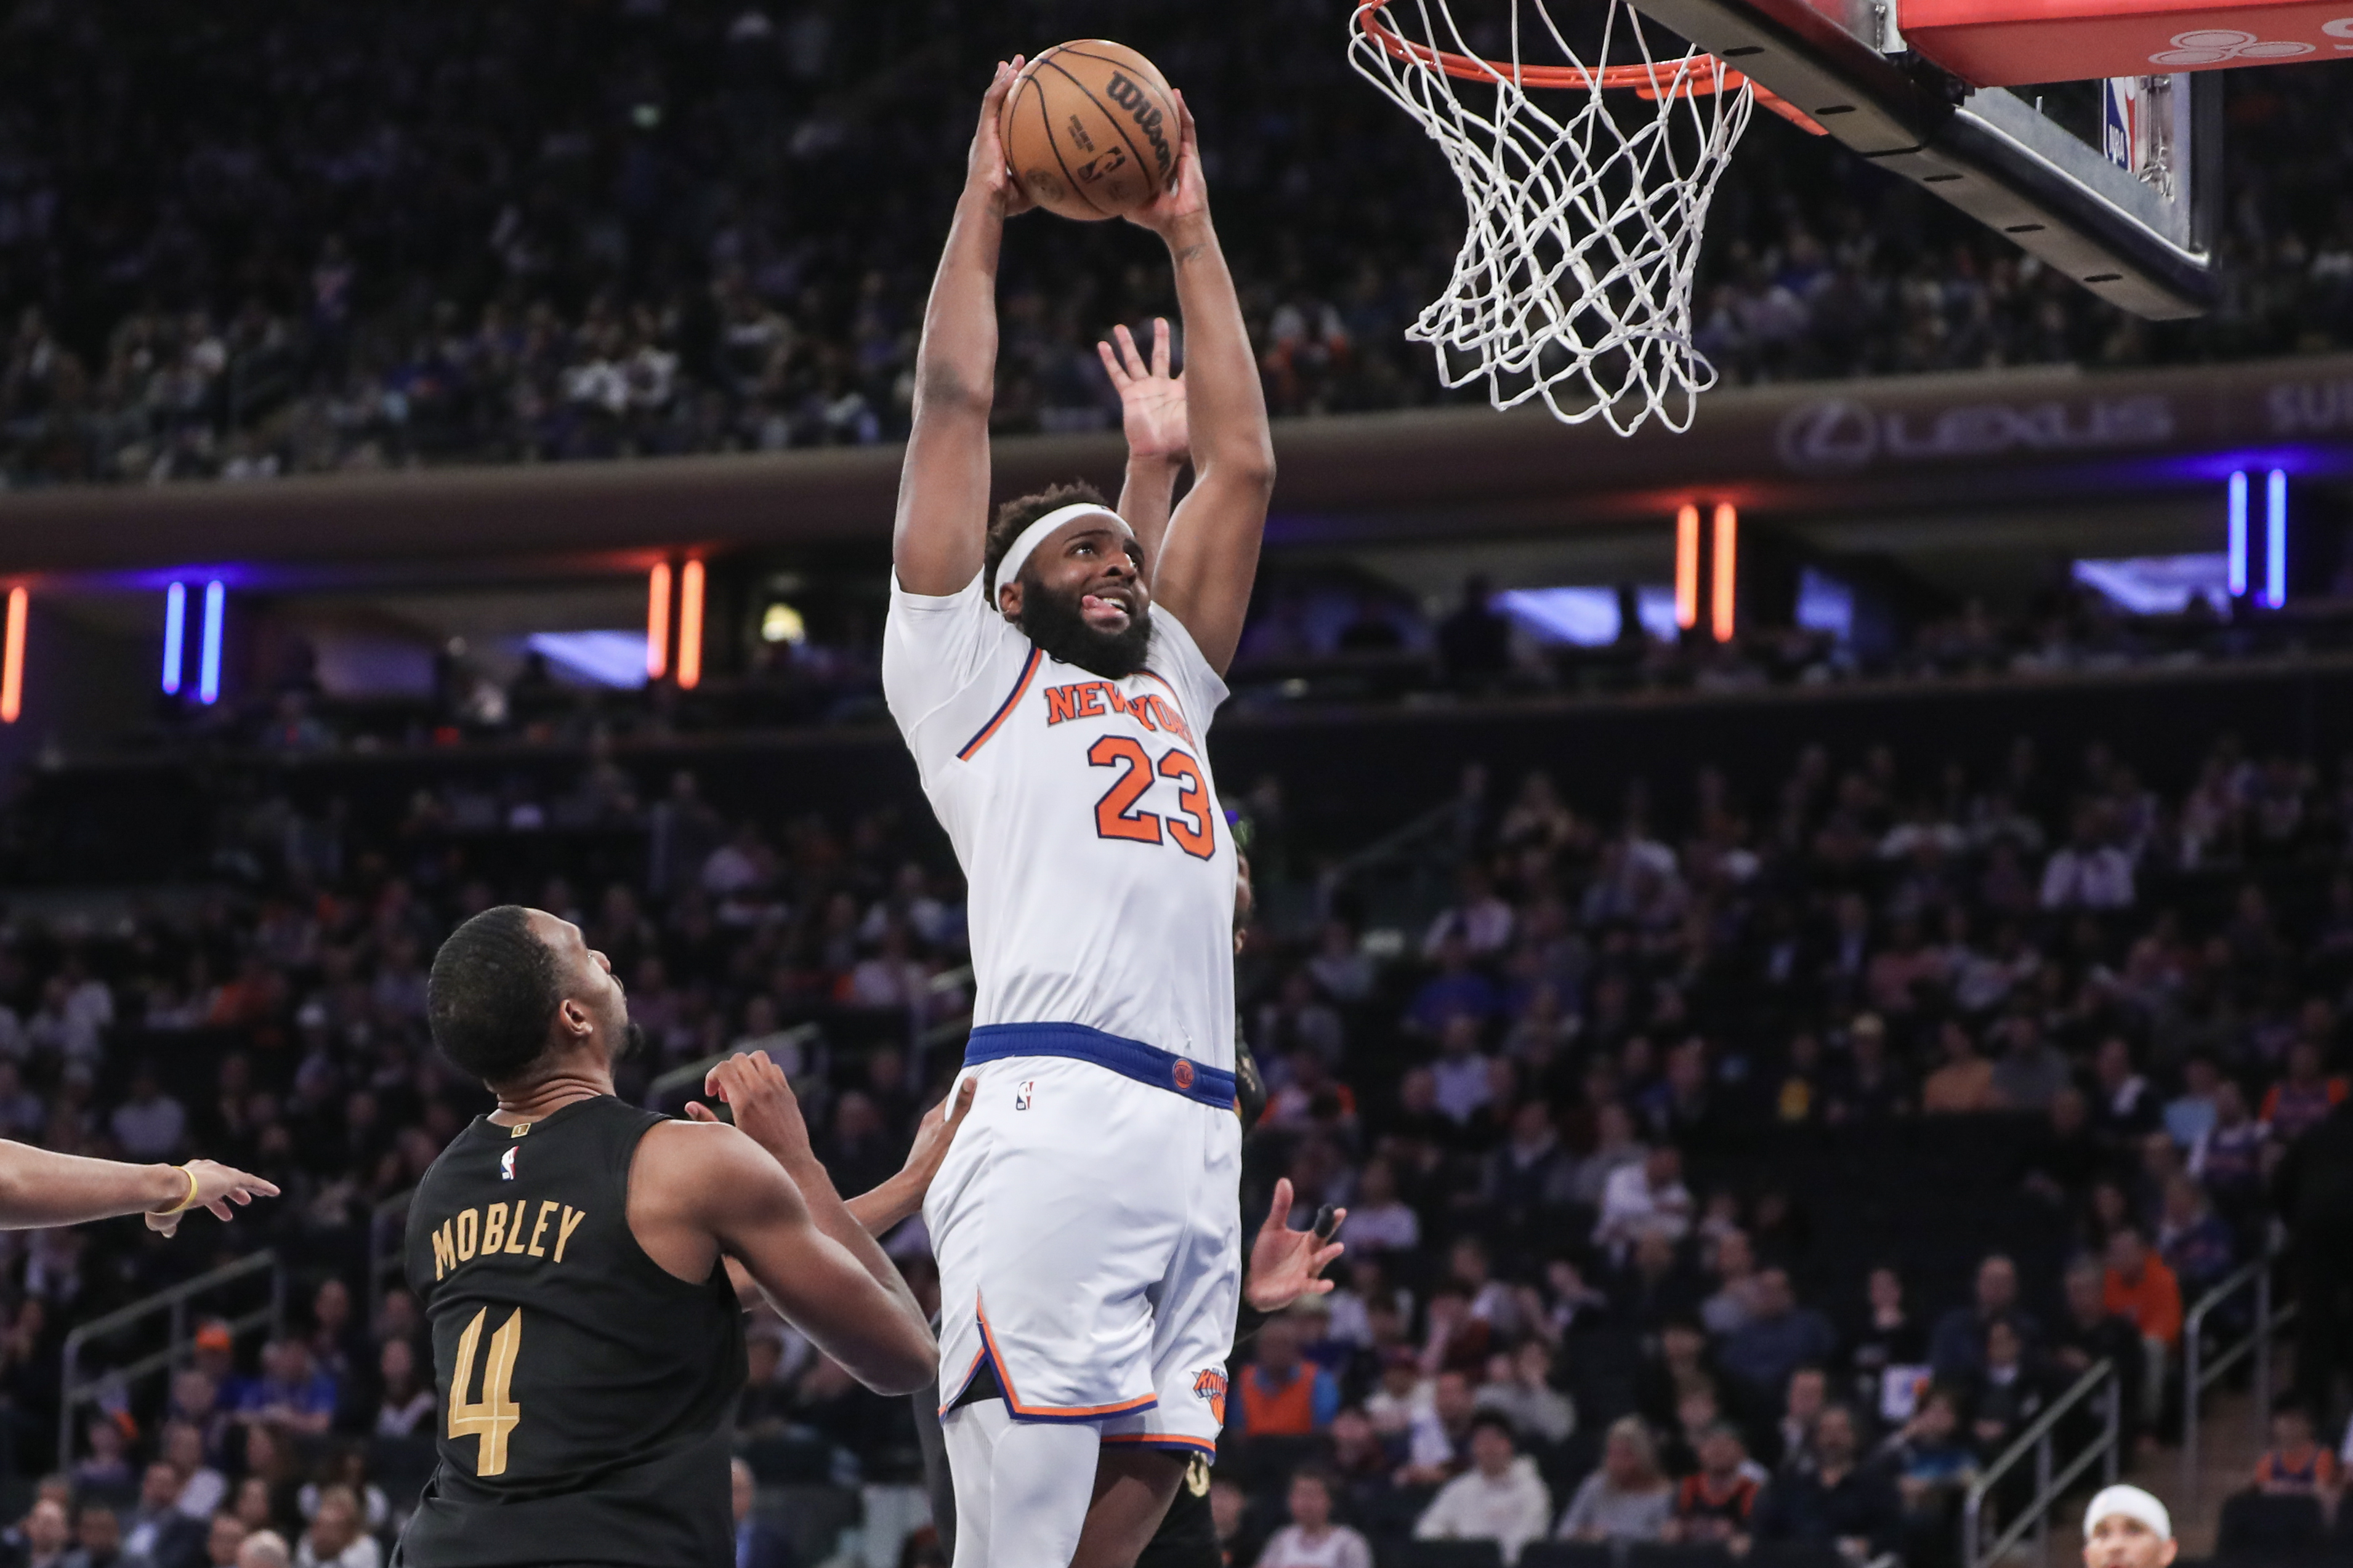 Apr 23, 2023; New York, New York, USA; New York Knicks center Mitchell Robinson (23) dunks during game four of the 2023 NBA playoffs against the Cleveland Cavaliers at Madison Square Garden. Mandatory Credit: Wendell Cruz-USA TODAY Sports